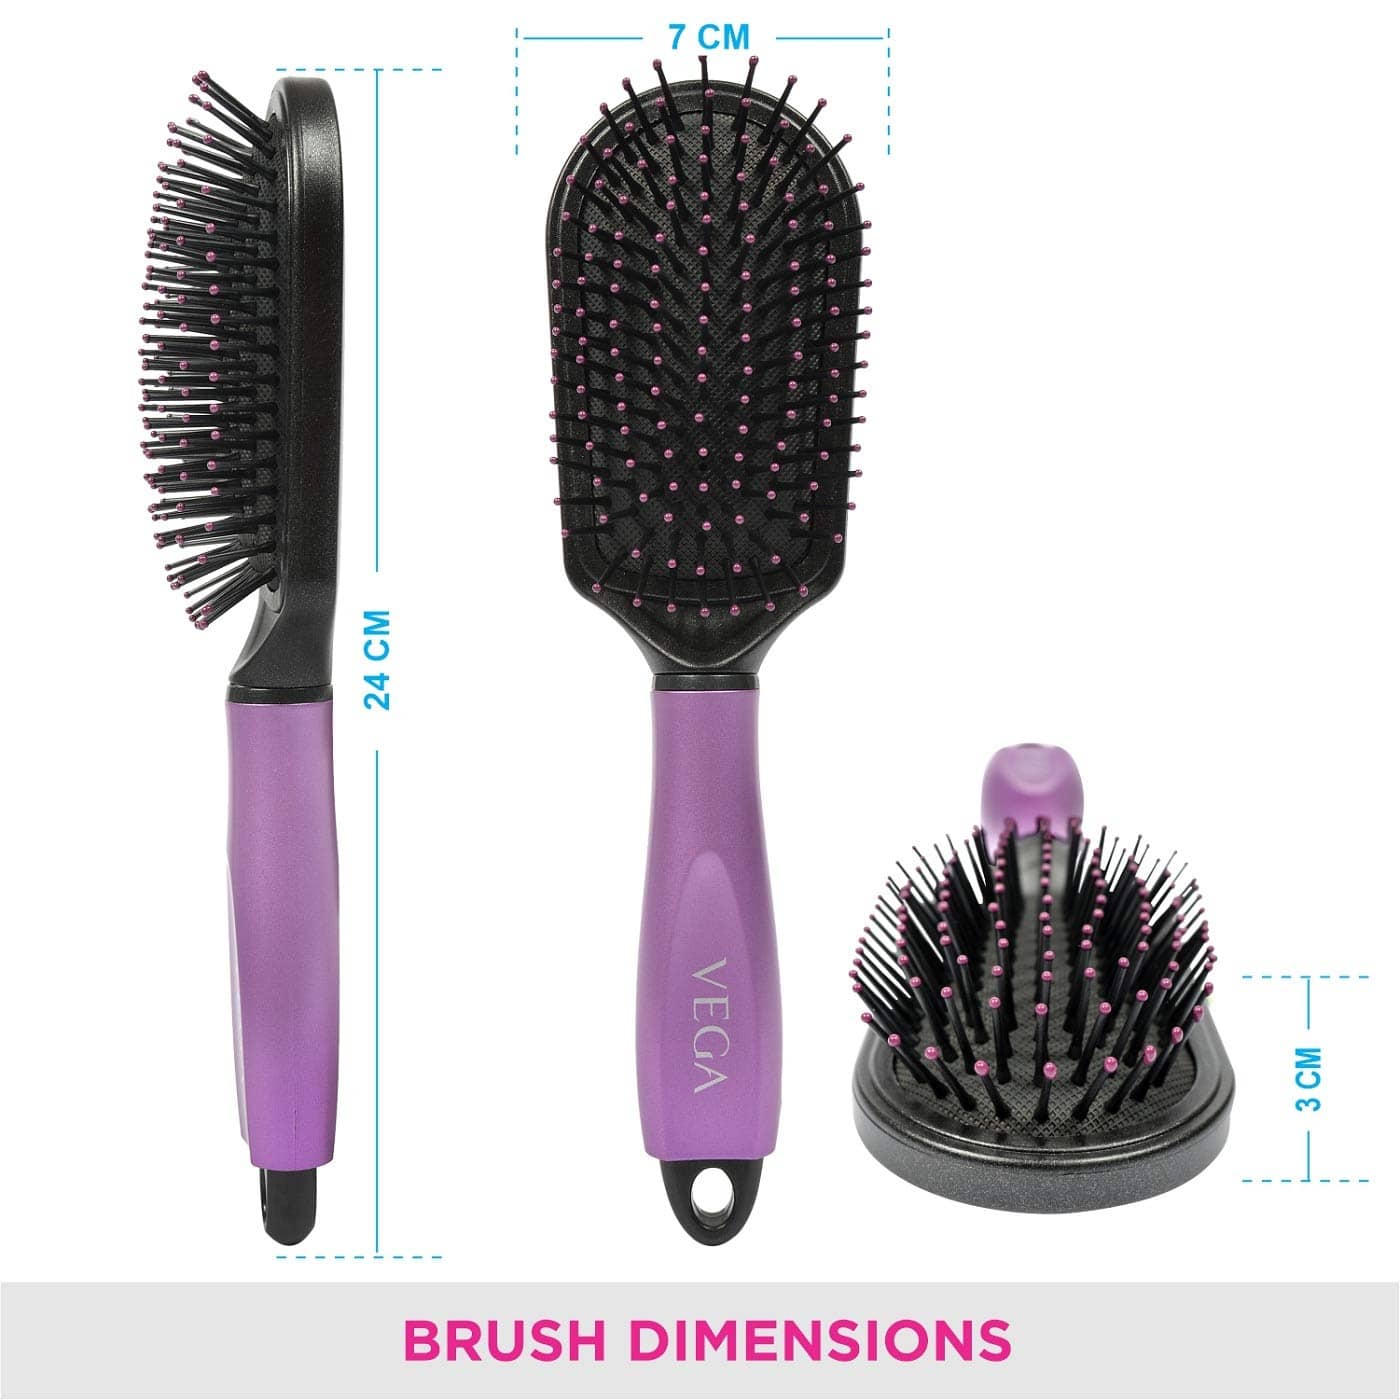 5 Best Hair Brushes for Every Hair Type and Length